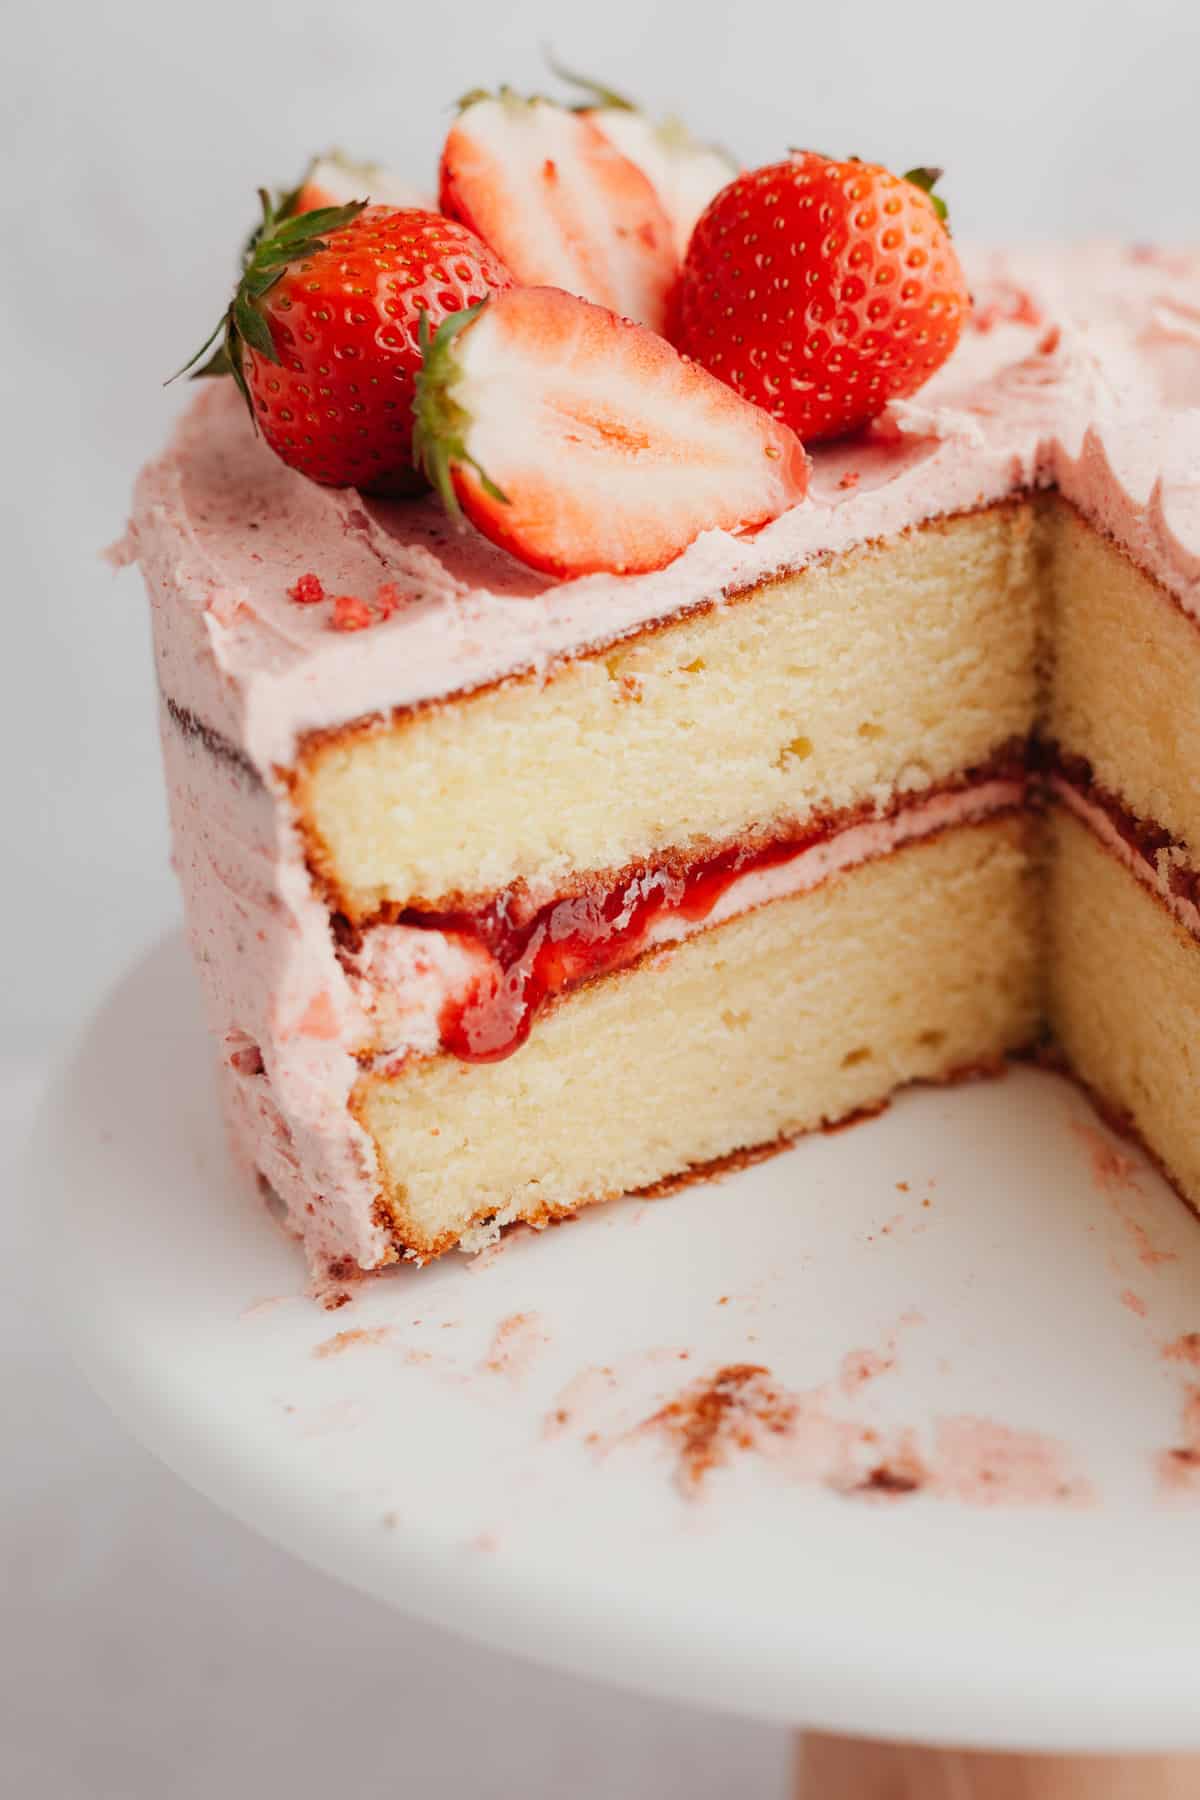 A close up of a two layer vanilla cake with a strawberry frosting, the cake has been cut.